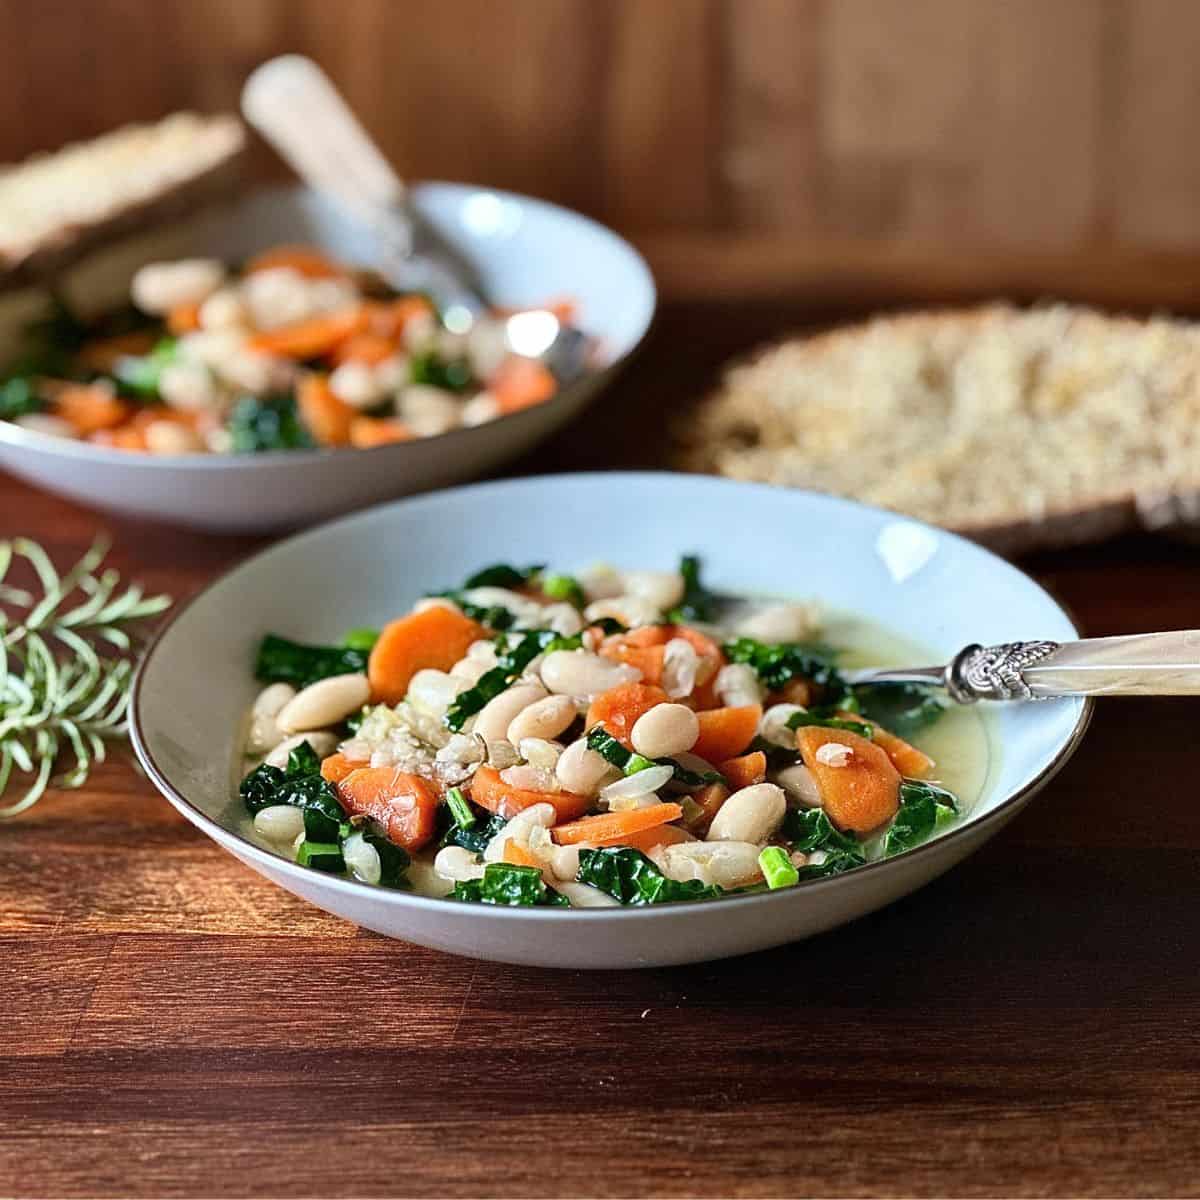 A serving bowl containing cannellini bean soup with cavolo nero and carrots.